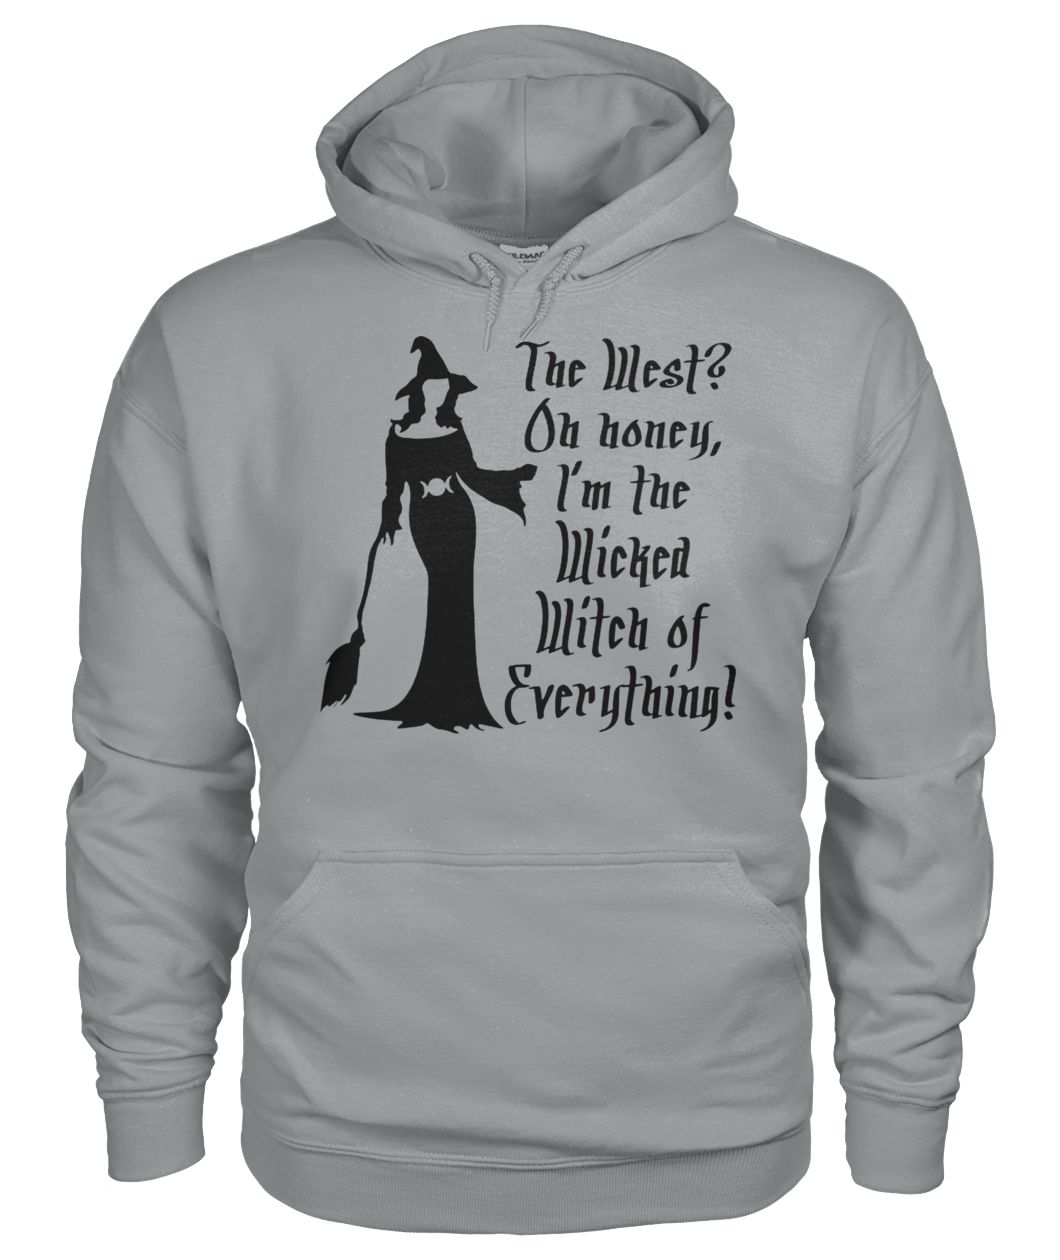 Halloween the west oh honey I'm the wicked witch of everything gildan hoodie